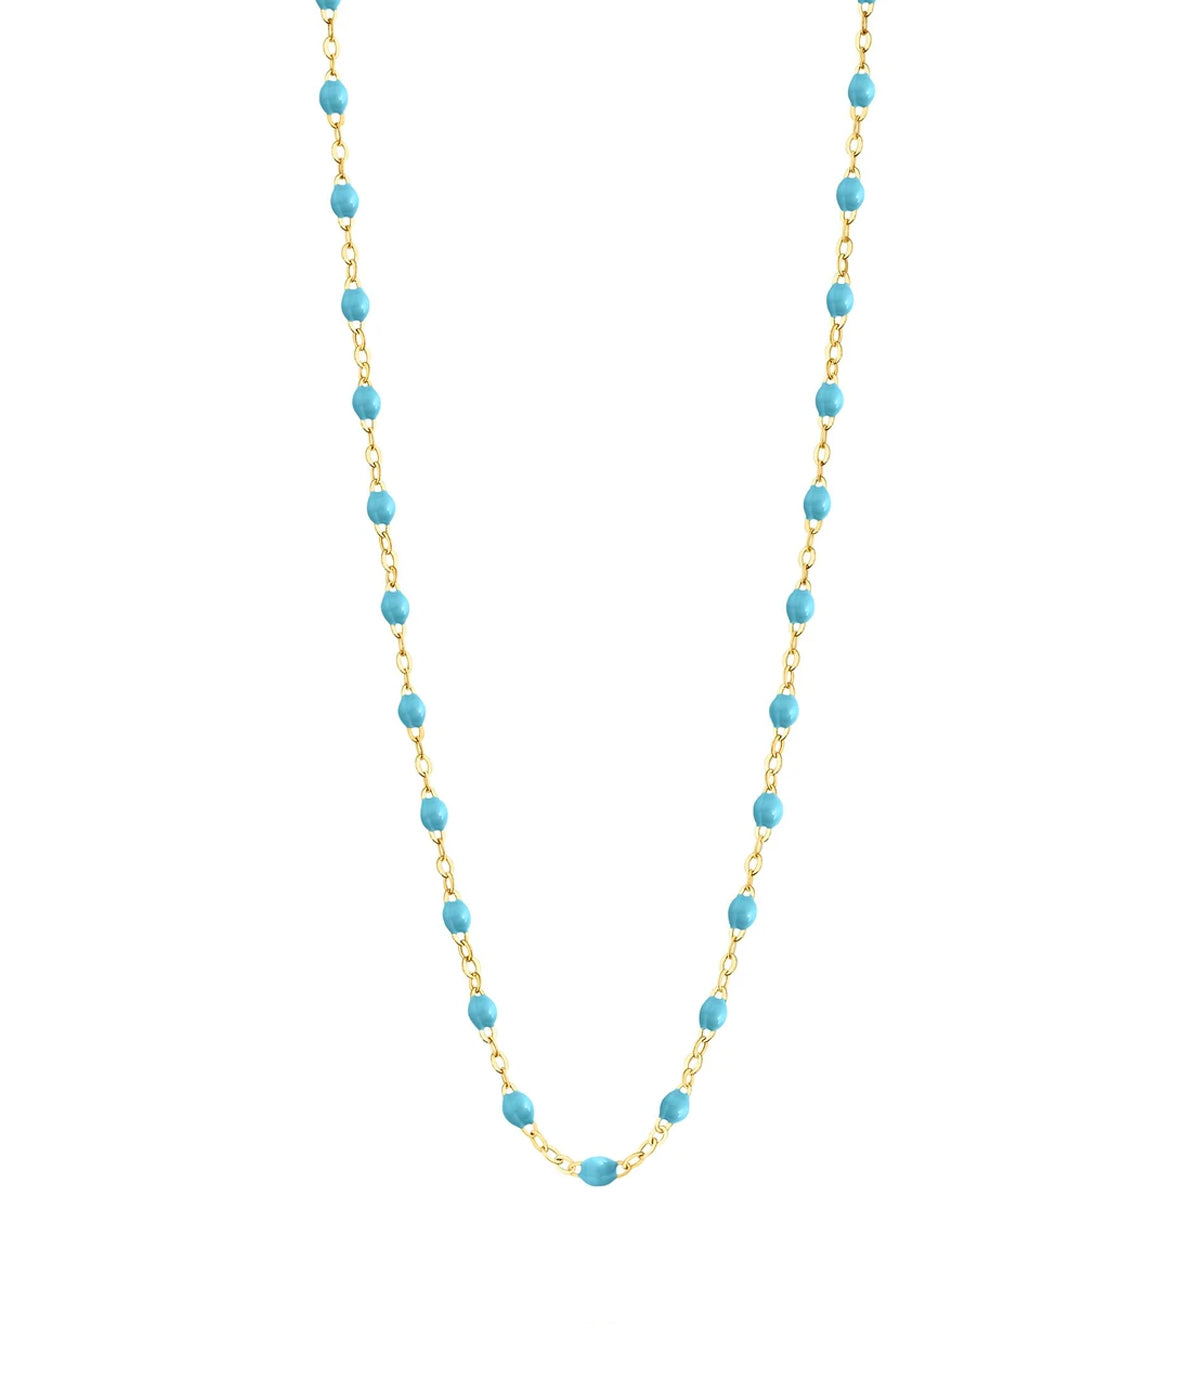 Classic Gigi 50cm Necklace in 18K Yellow Gold & Turquoise